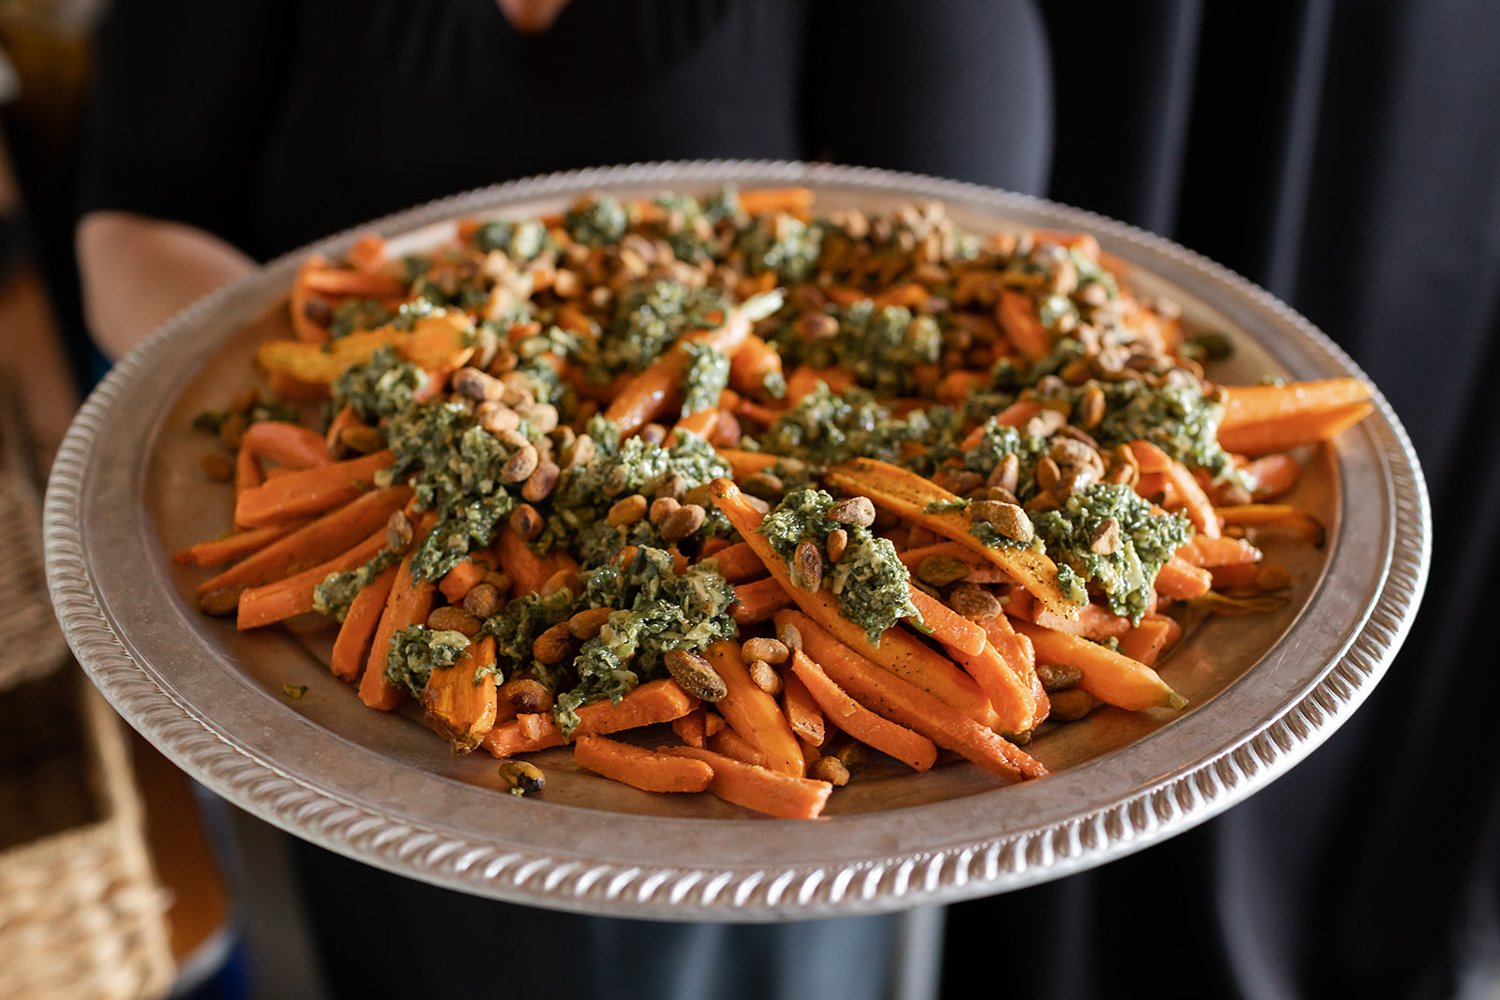 roasted carrots with pesto topping for vegetarian option at wedding 